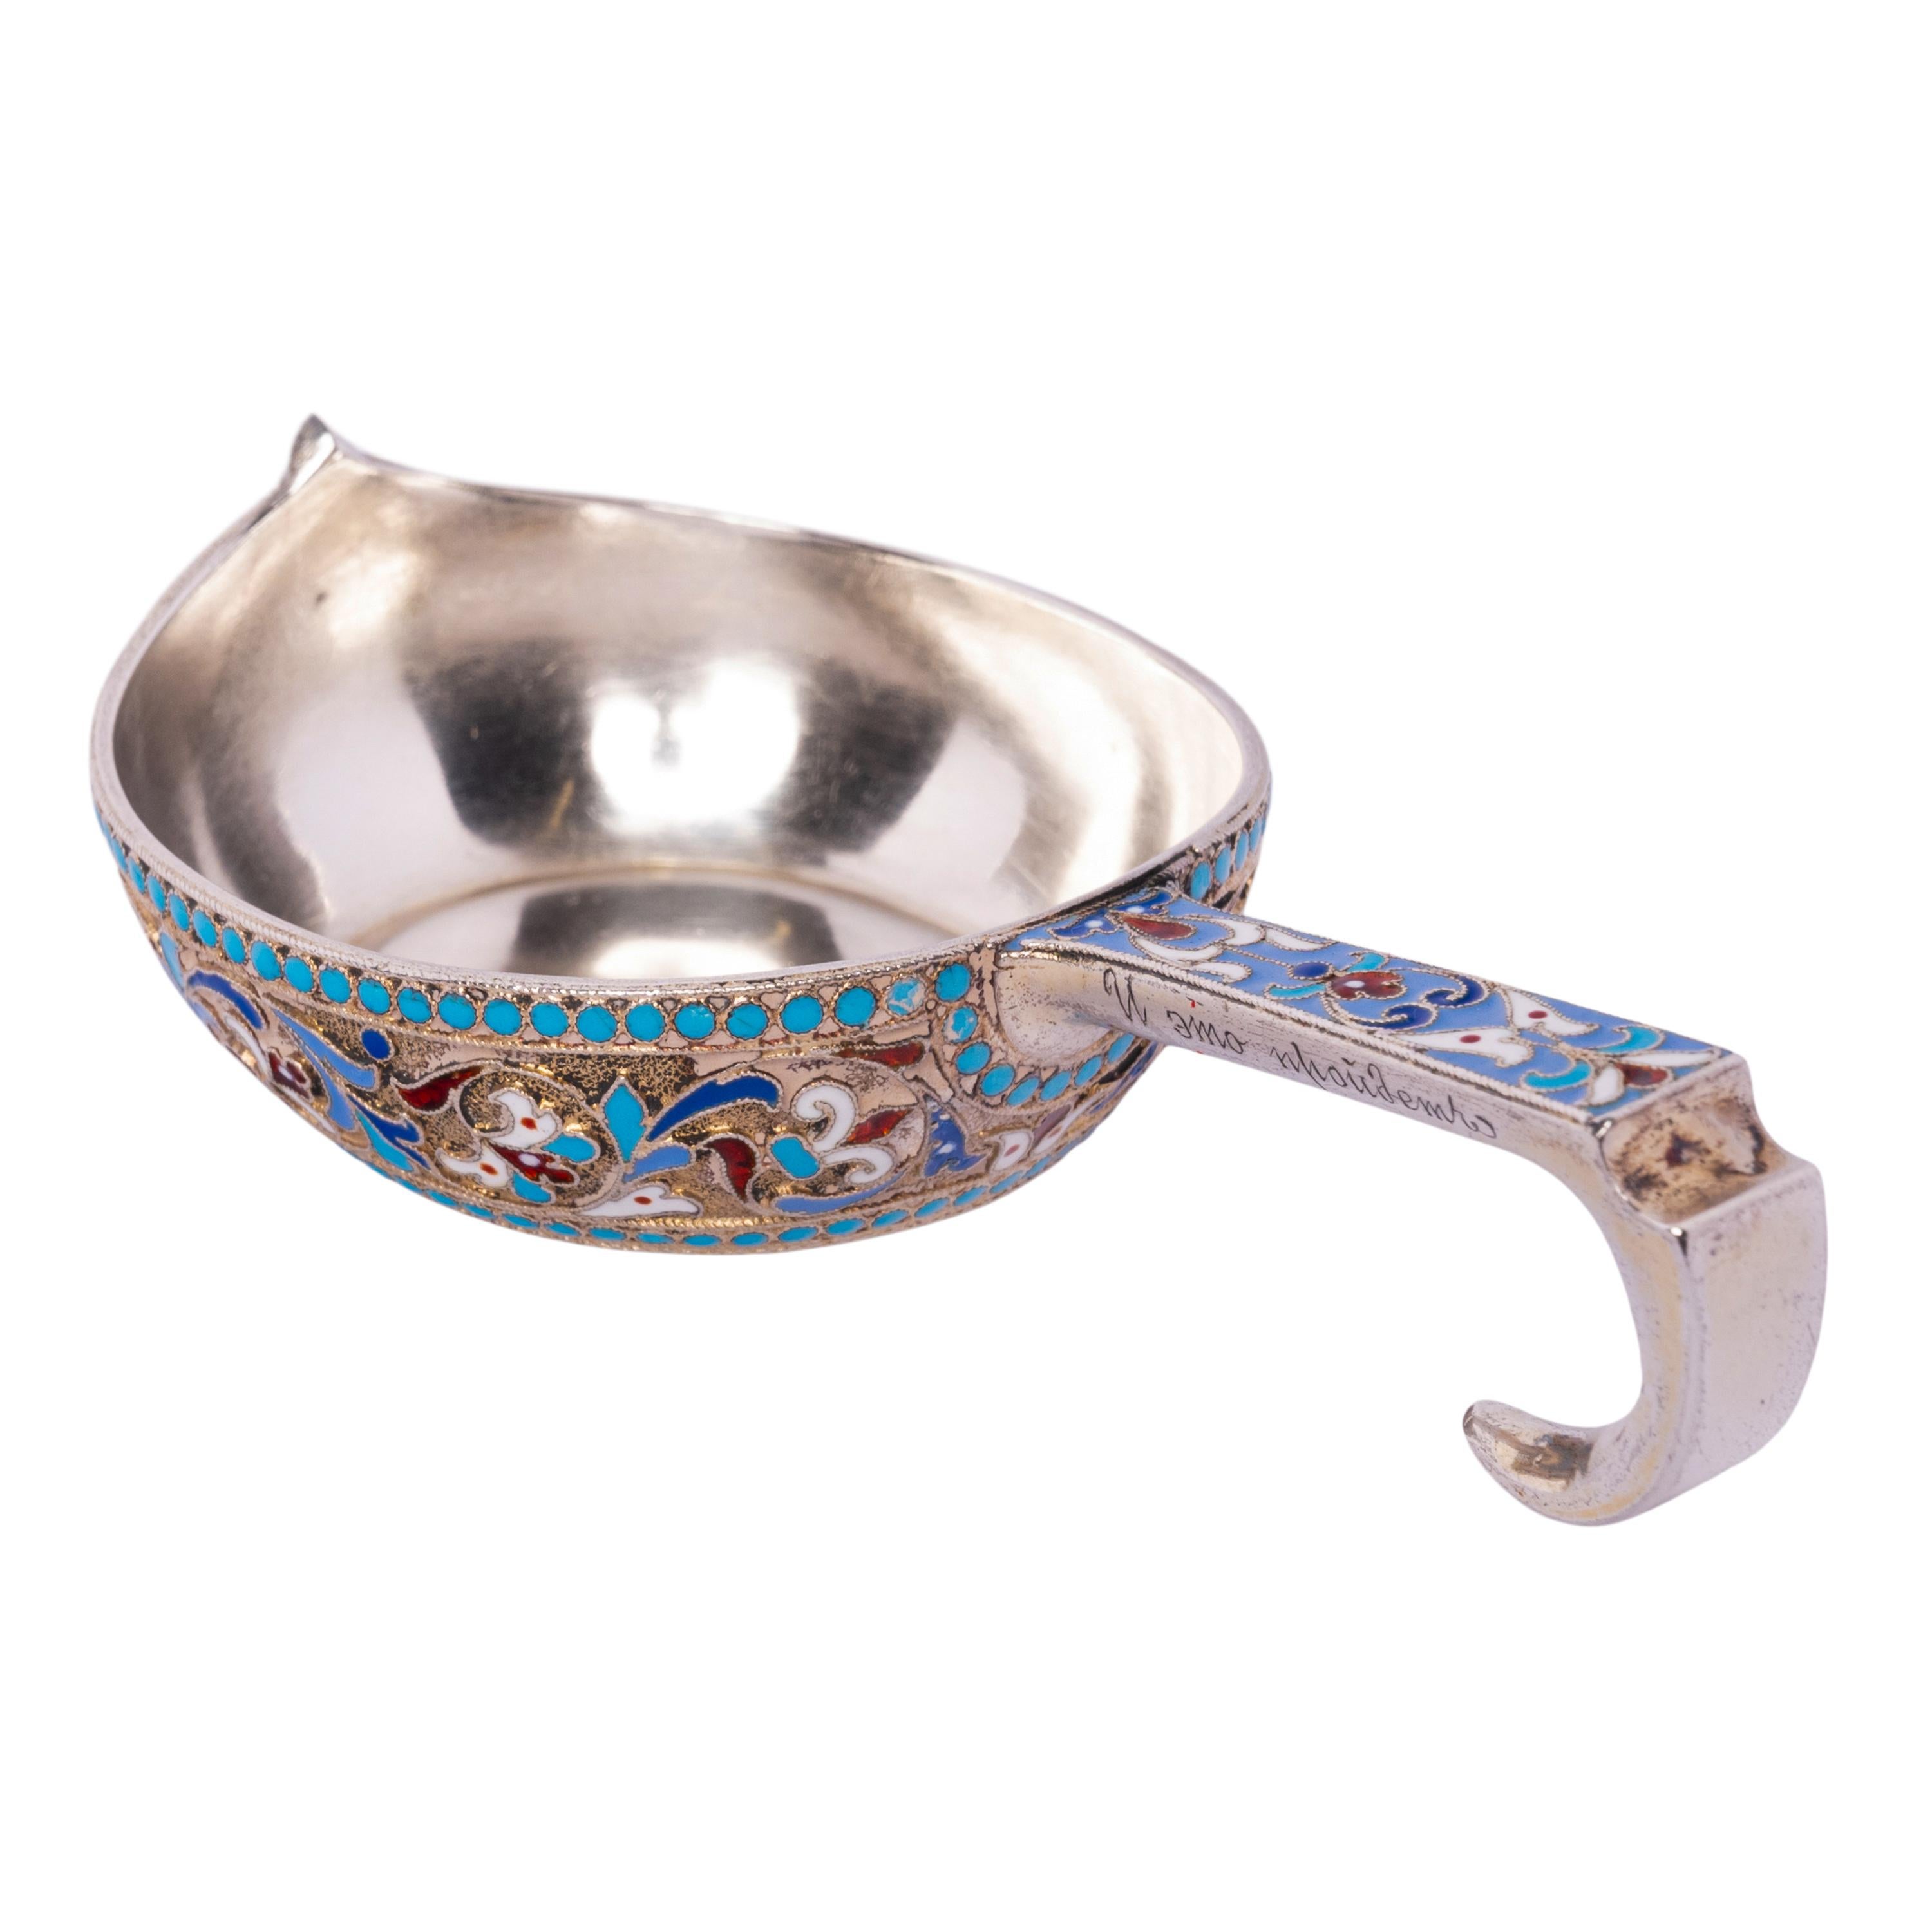 A good antique Imperial Russian silver & cloisonne enamel kovsh, silversmith Nikolai Lakovlev Antipov & assayer Anotoly Apollonovish Artsybashev, Moscow, 1896.
The kovsh of traditional form with a shallow bowl and hooked handle, the outside of the